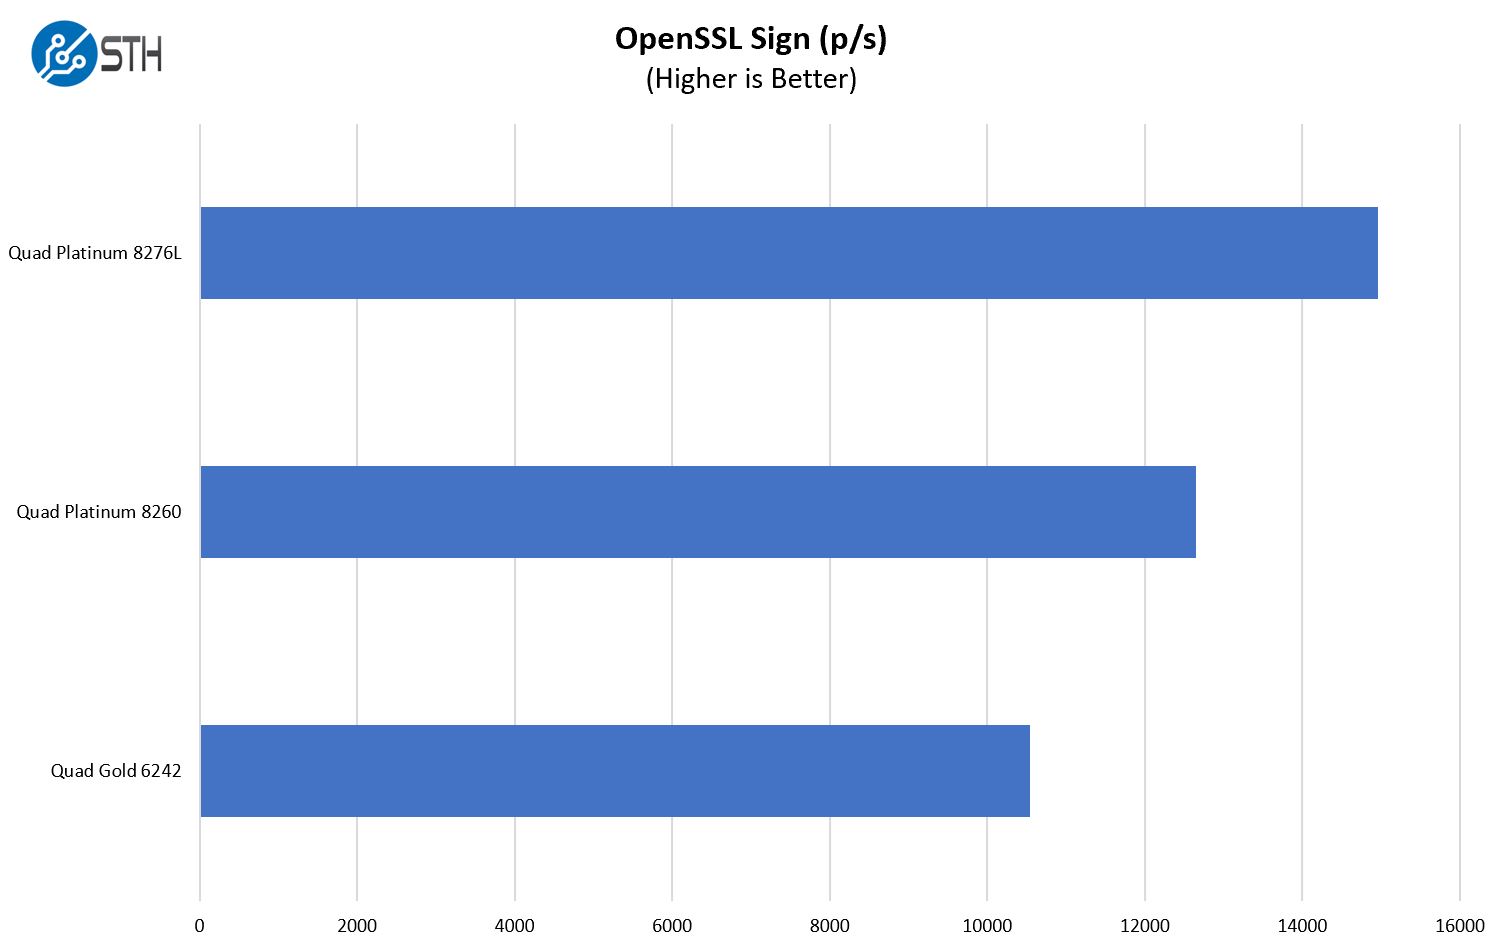 Inspur Systems NF8260M5 4P OpenSSL Sign Benchmark